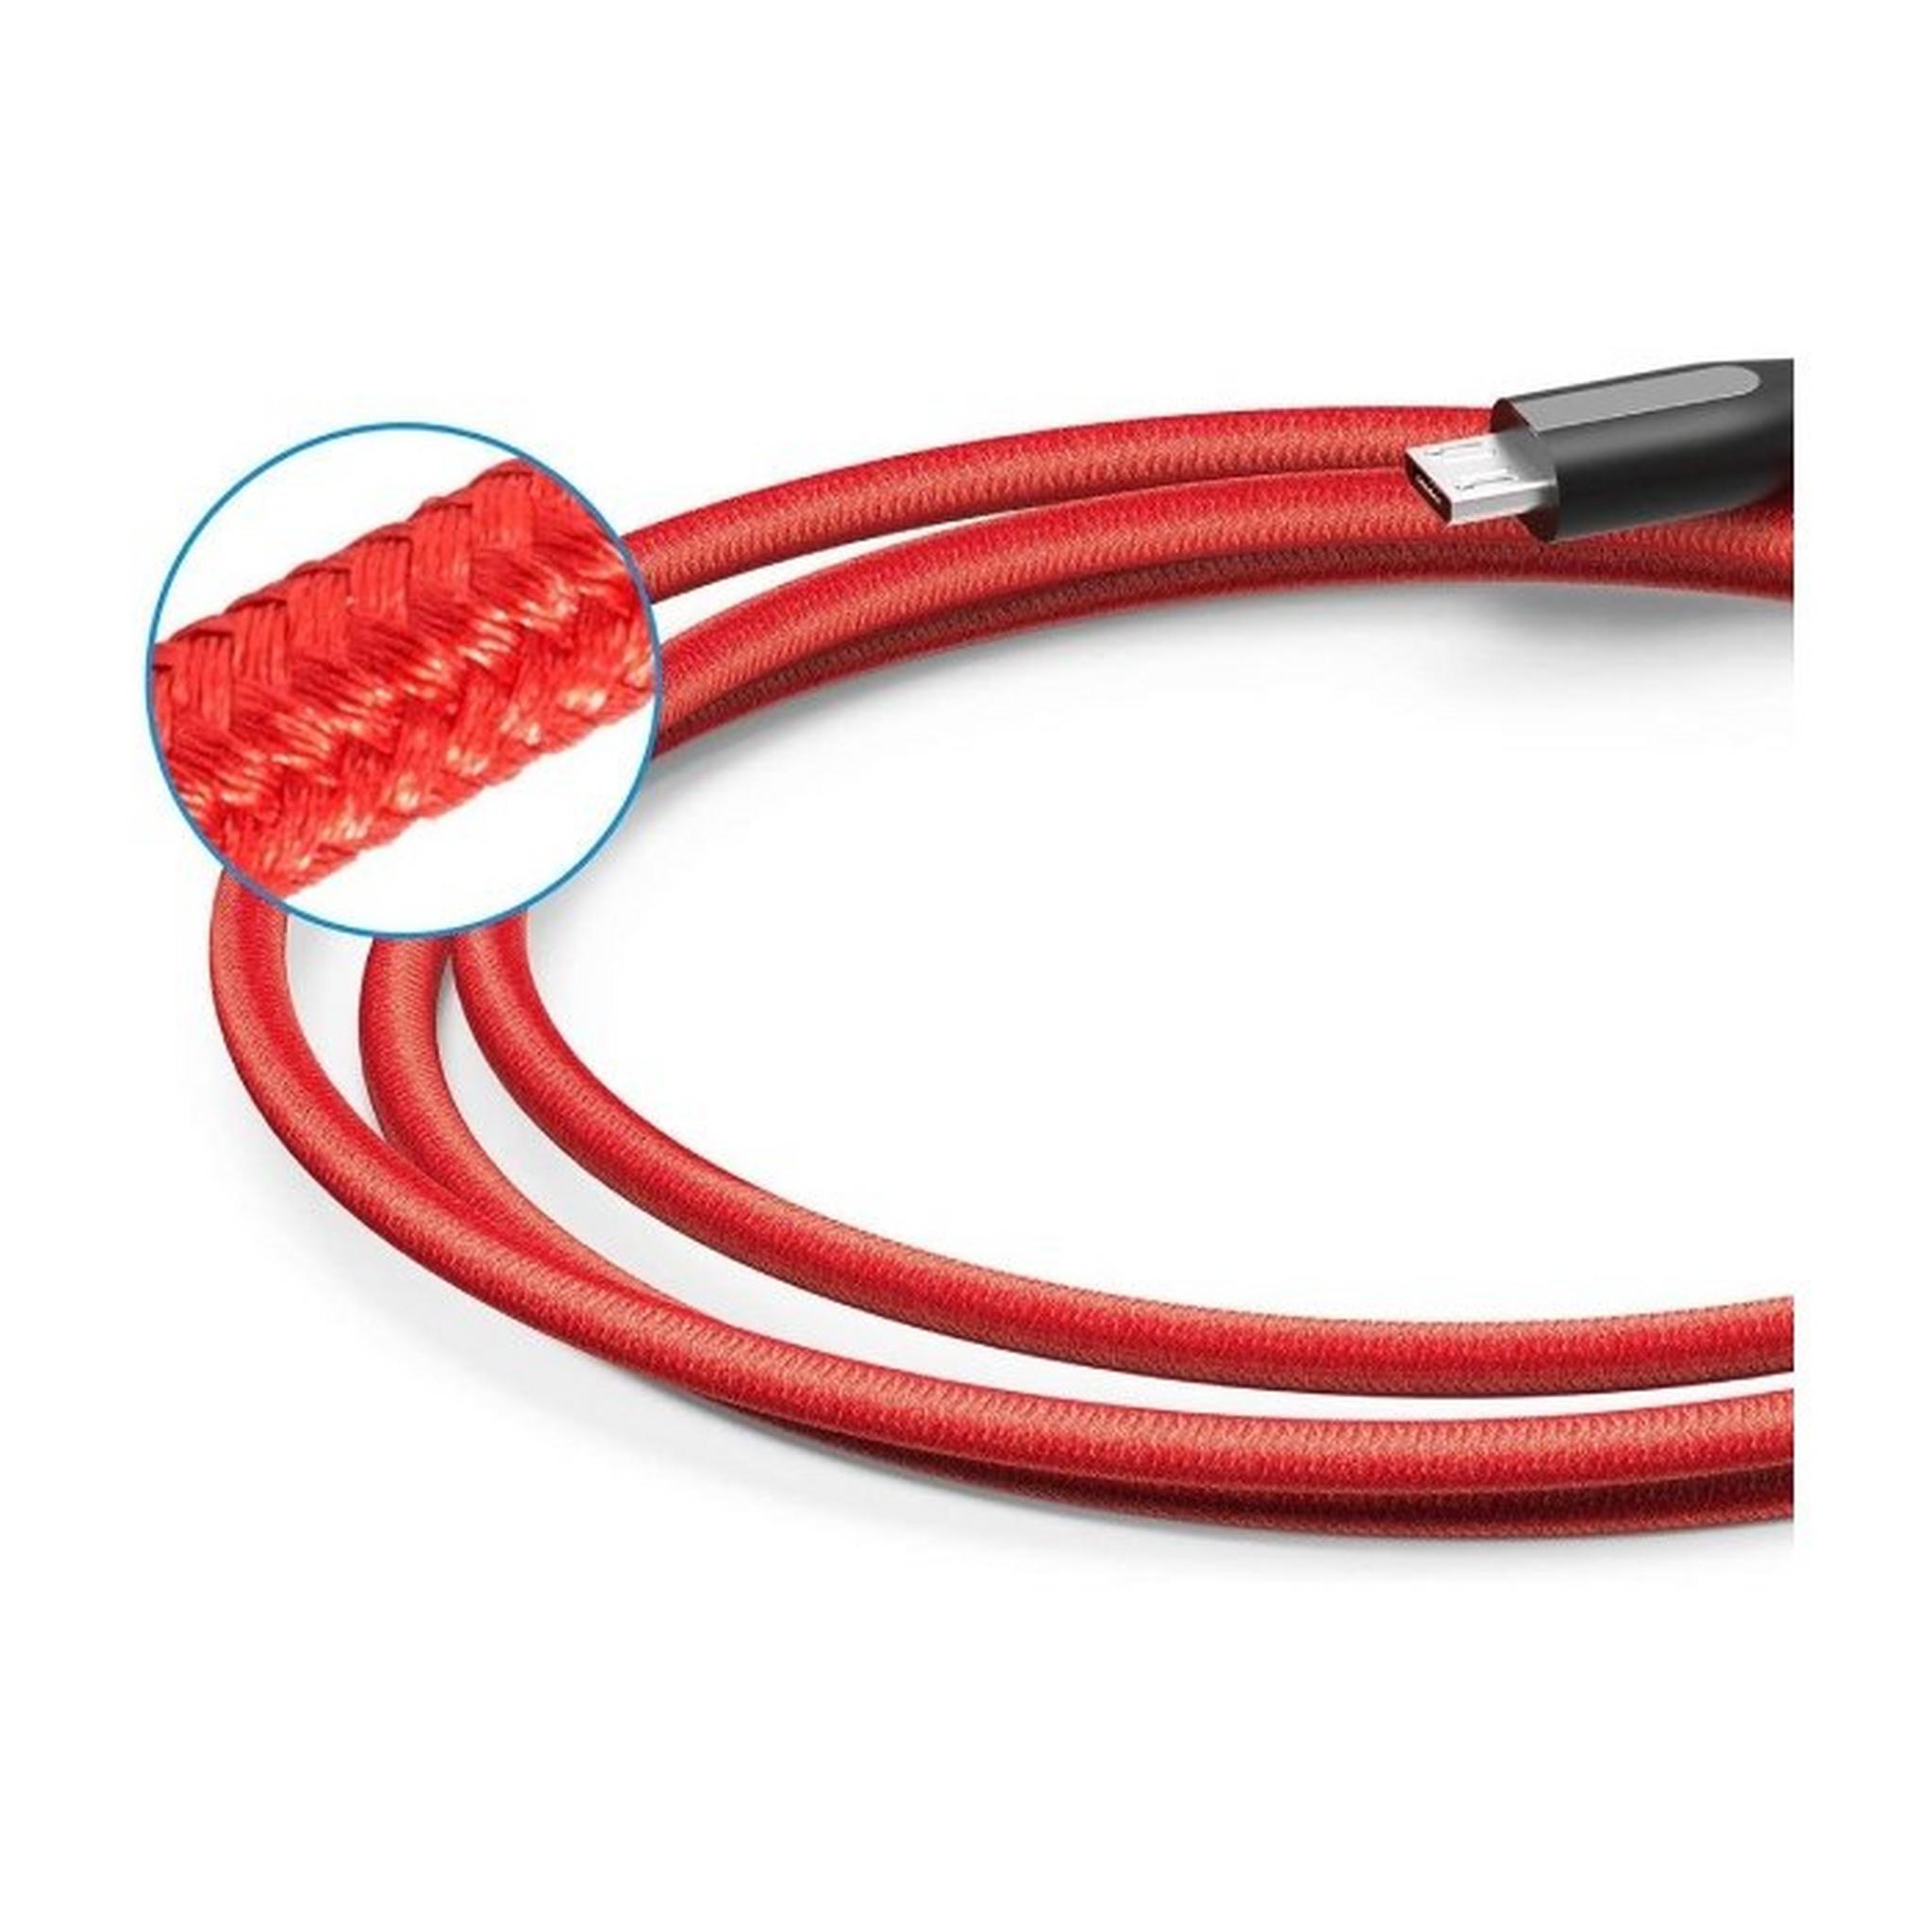 Anker Powerline Micro USB Cable 3M - Red